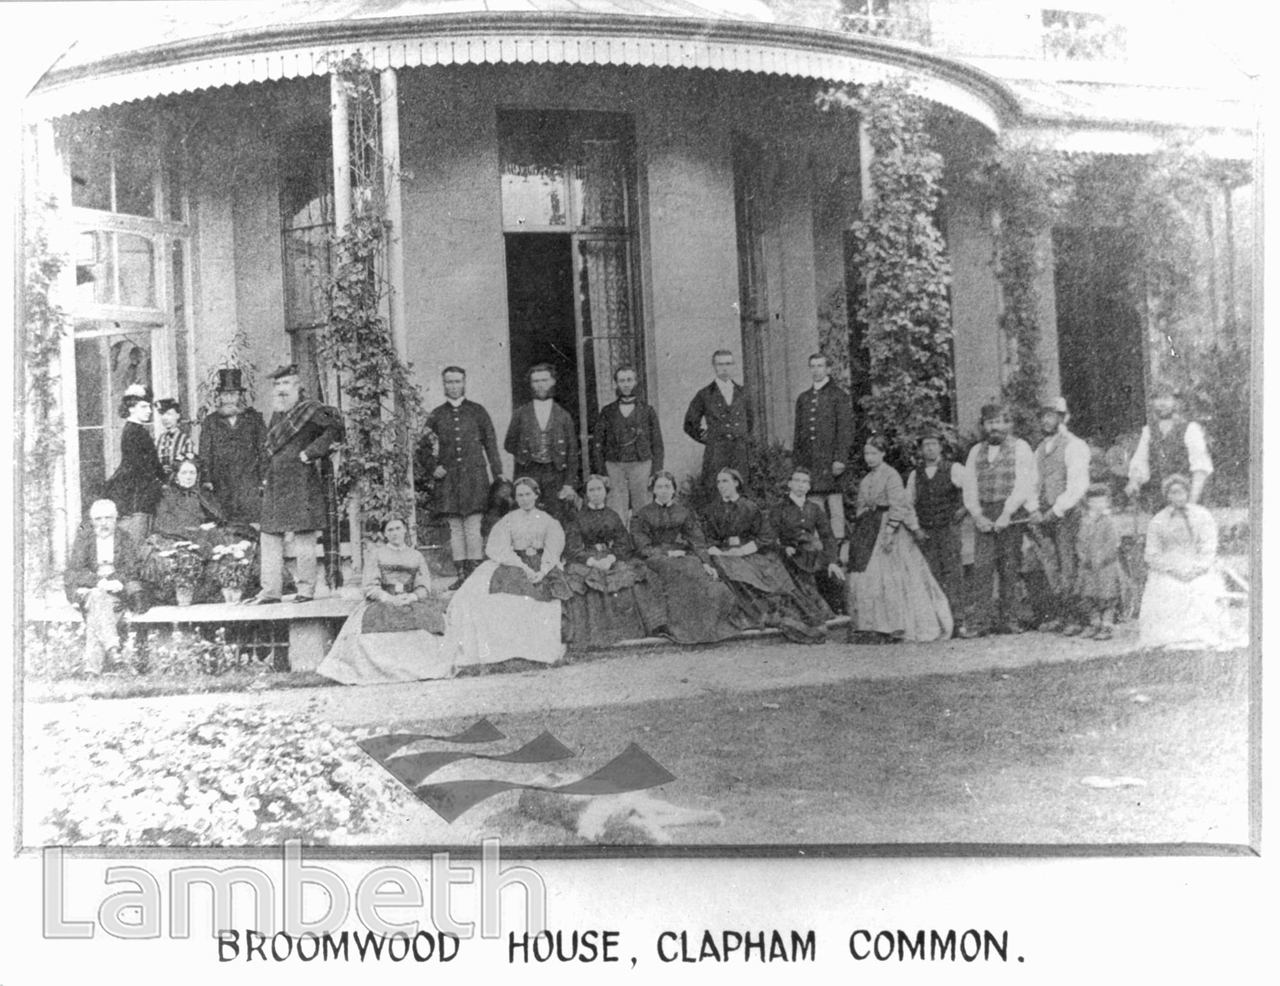 BROOMWOOD HOUSE, CLAPHAM COMMON WEST SIDE, CLAPHAM